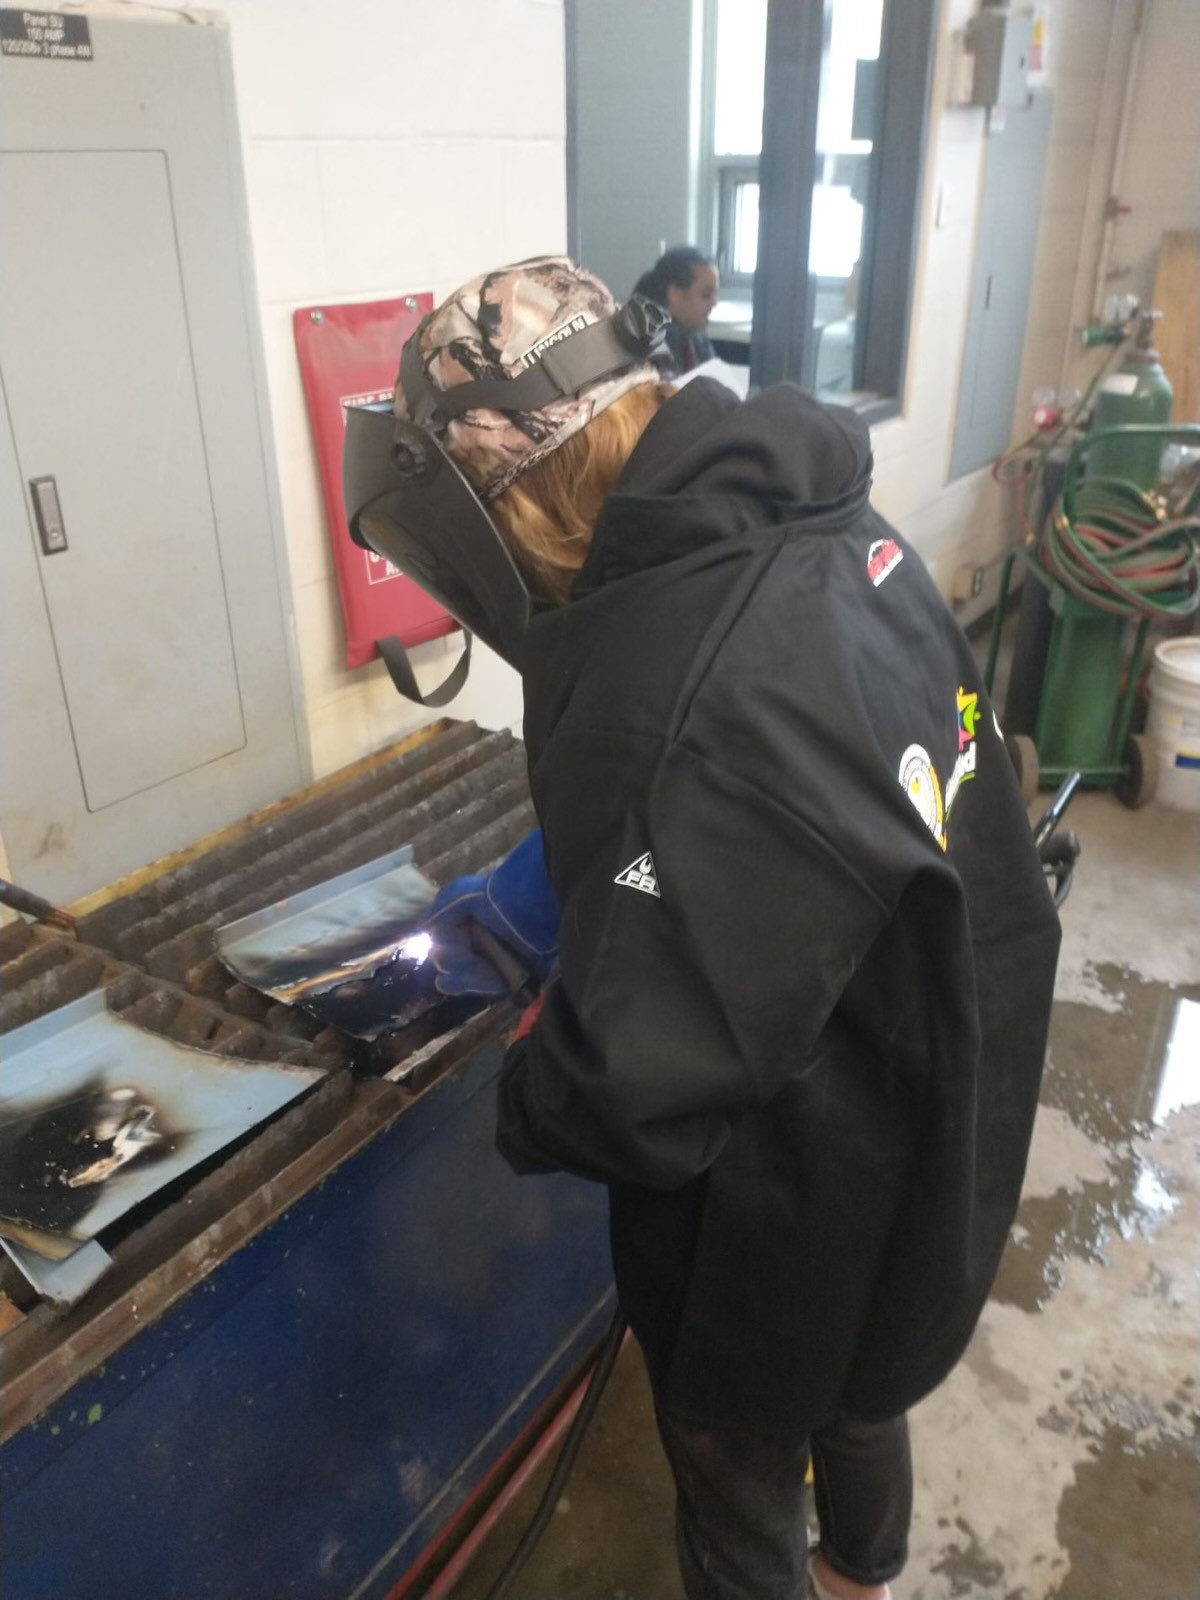 Donation of PPE helps students continue their welding education